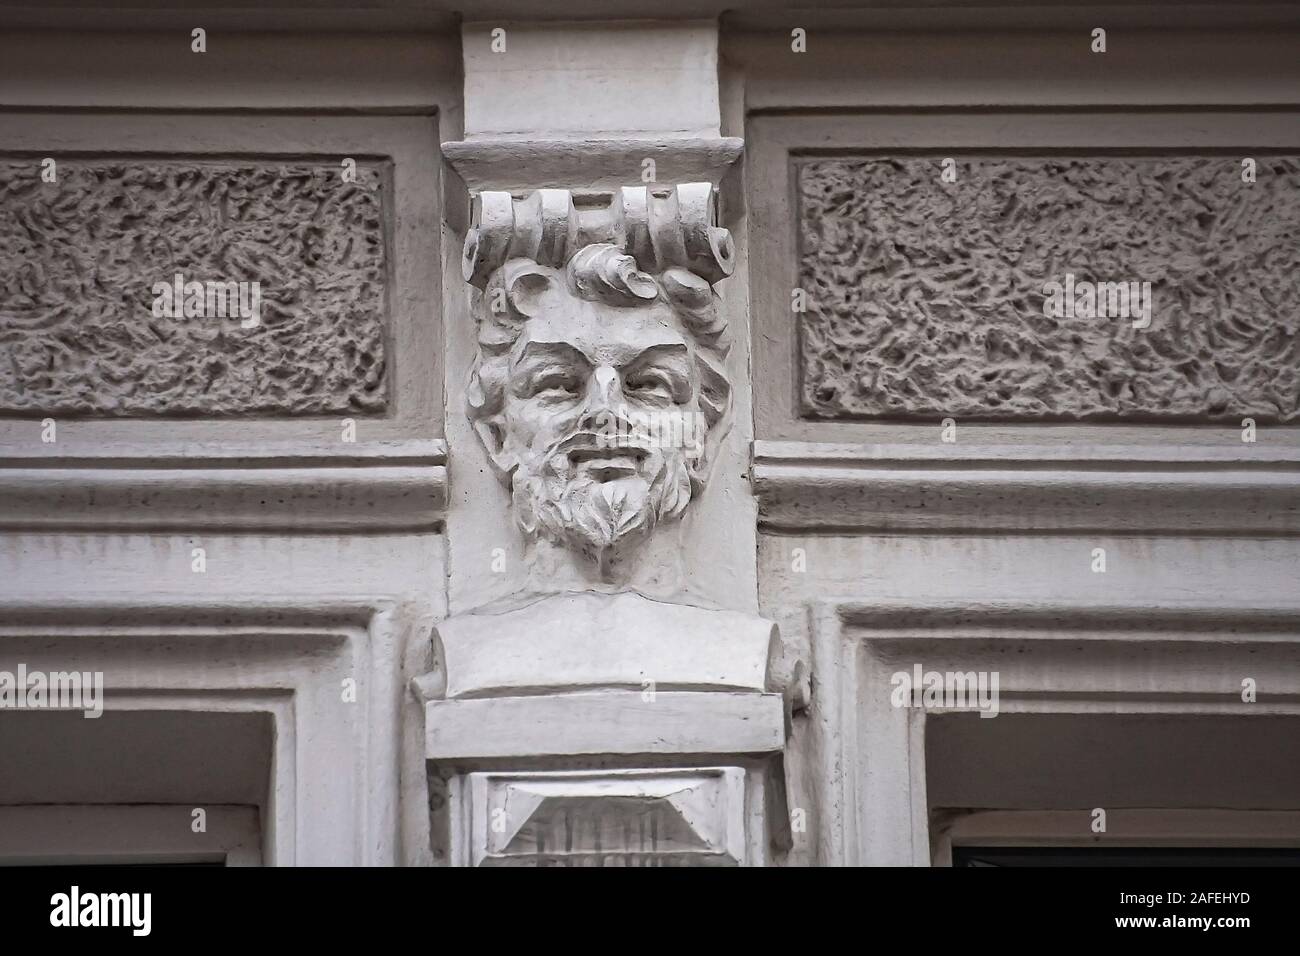 Mascaron elements of architecture, detail decorations of building wall tenement house stucco texture Katowice Stock Photo